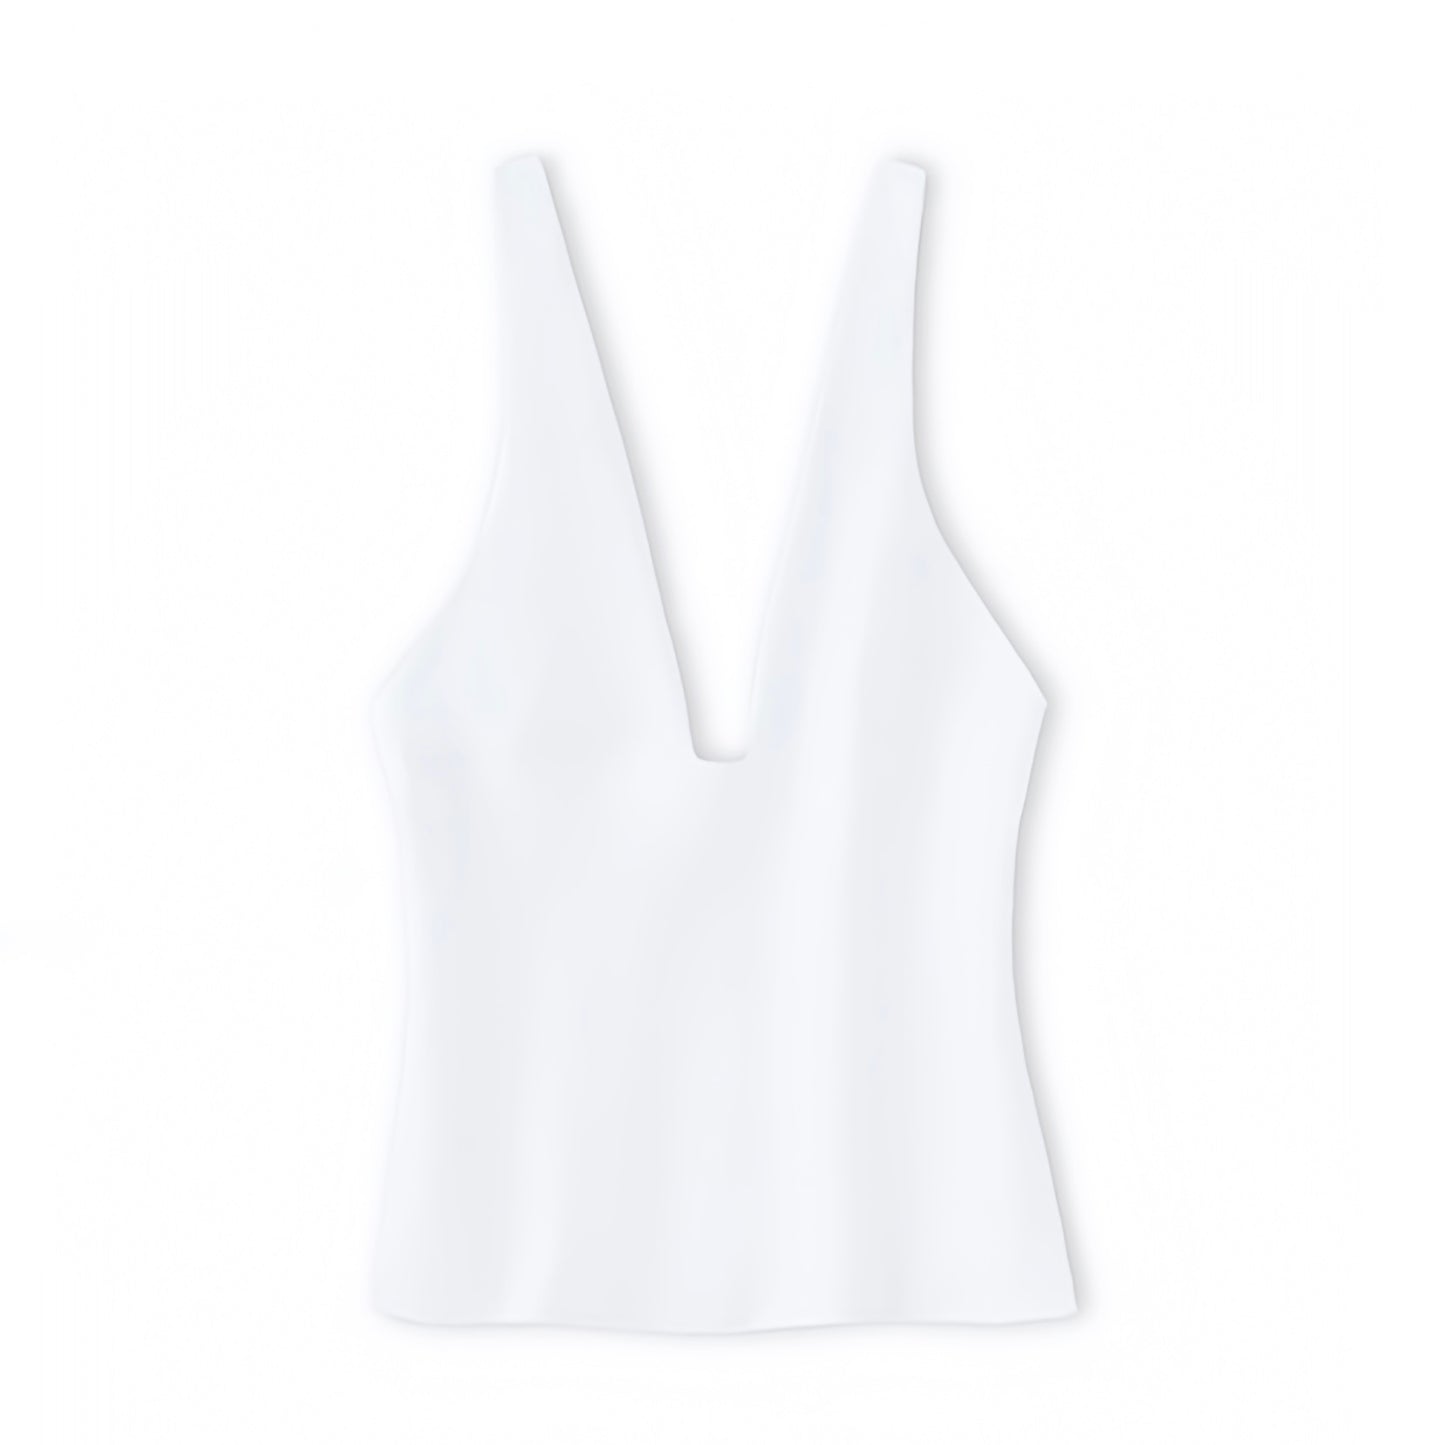 white-ivory-cream-slim-fit-bodycon-corset-bustier-deep-v-neck-sleeveless-short-sleeve-spaghetti-strap-backless-open-back-cut-out-camisole-crop-vest-tank-top-blouse-women-ladies-chic-trendy-spring-2024-summer-elegant-casual-semi-formal-classy-feminine-party-date-night-out-sexy-club-wear-y2k-90s-minimalist-office-siren-style-zara-revolve-aritzia-whitefox-princess-polly-babyboo-iamgia-edikted-fenity-areyouami